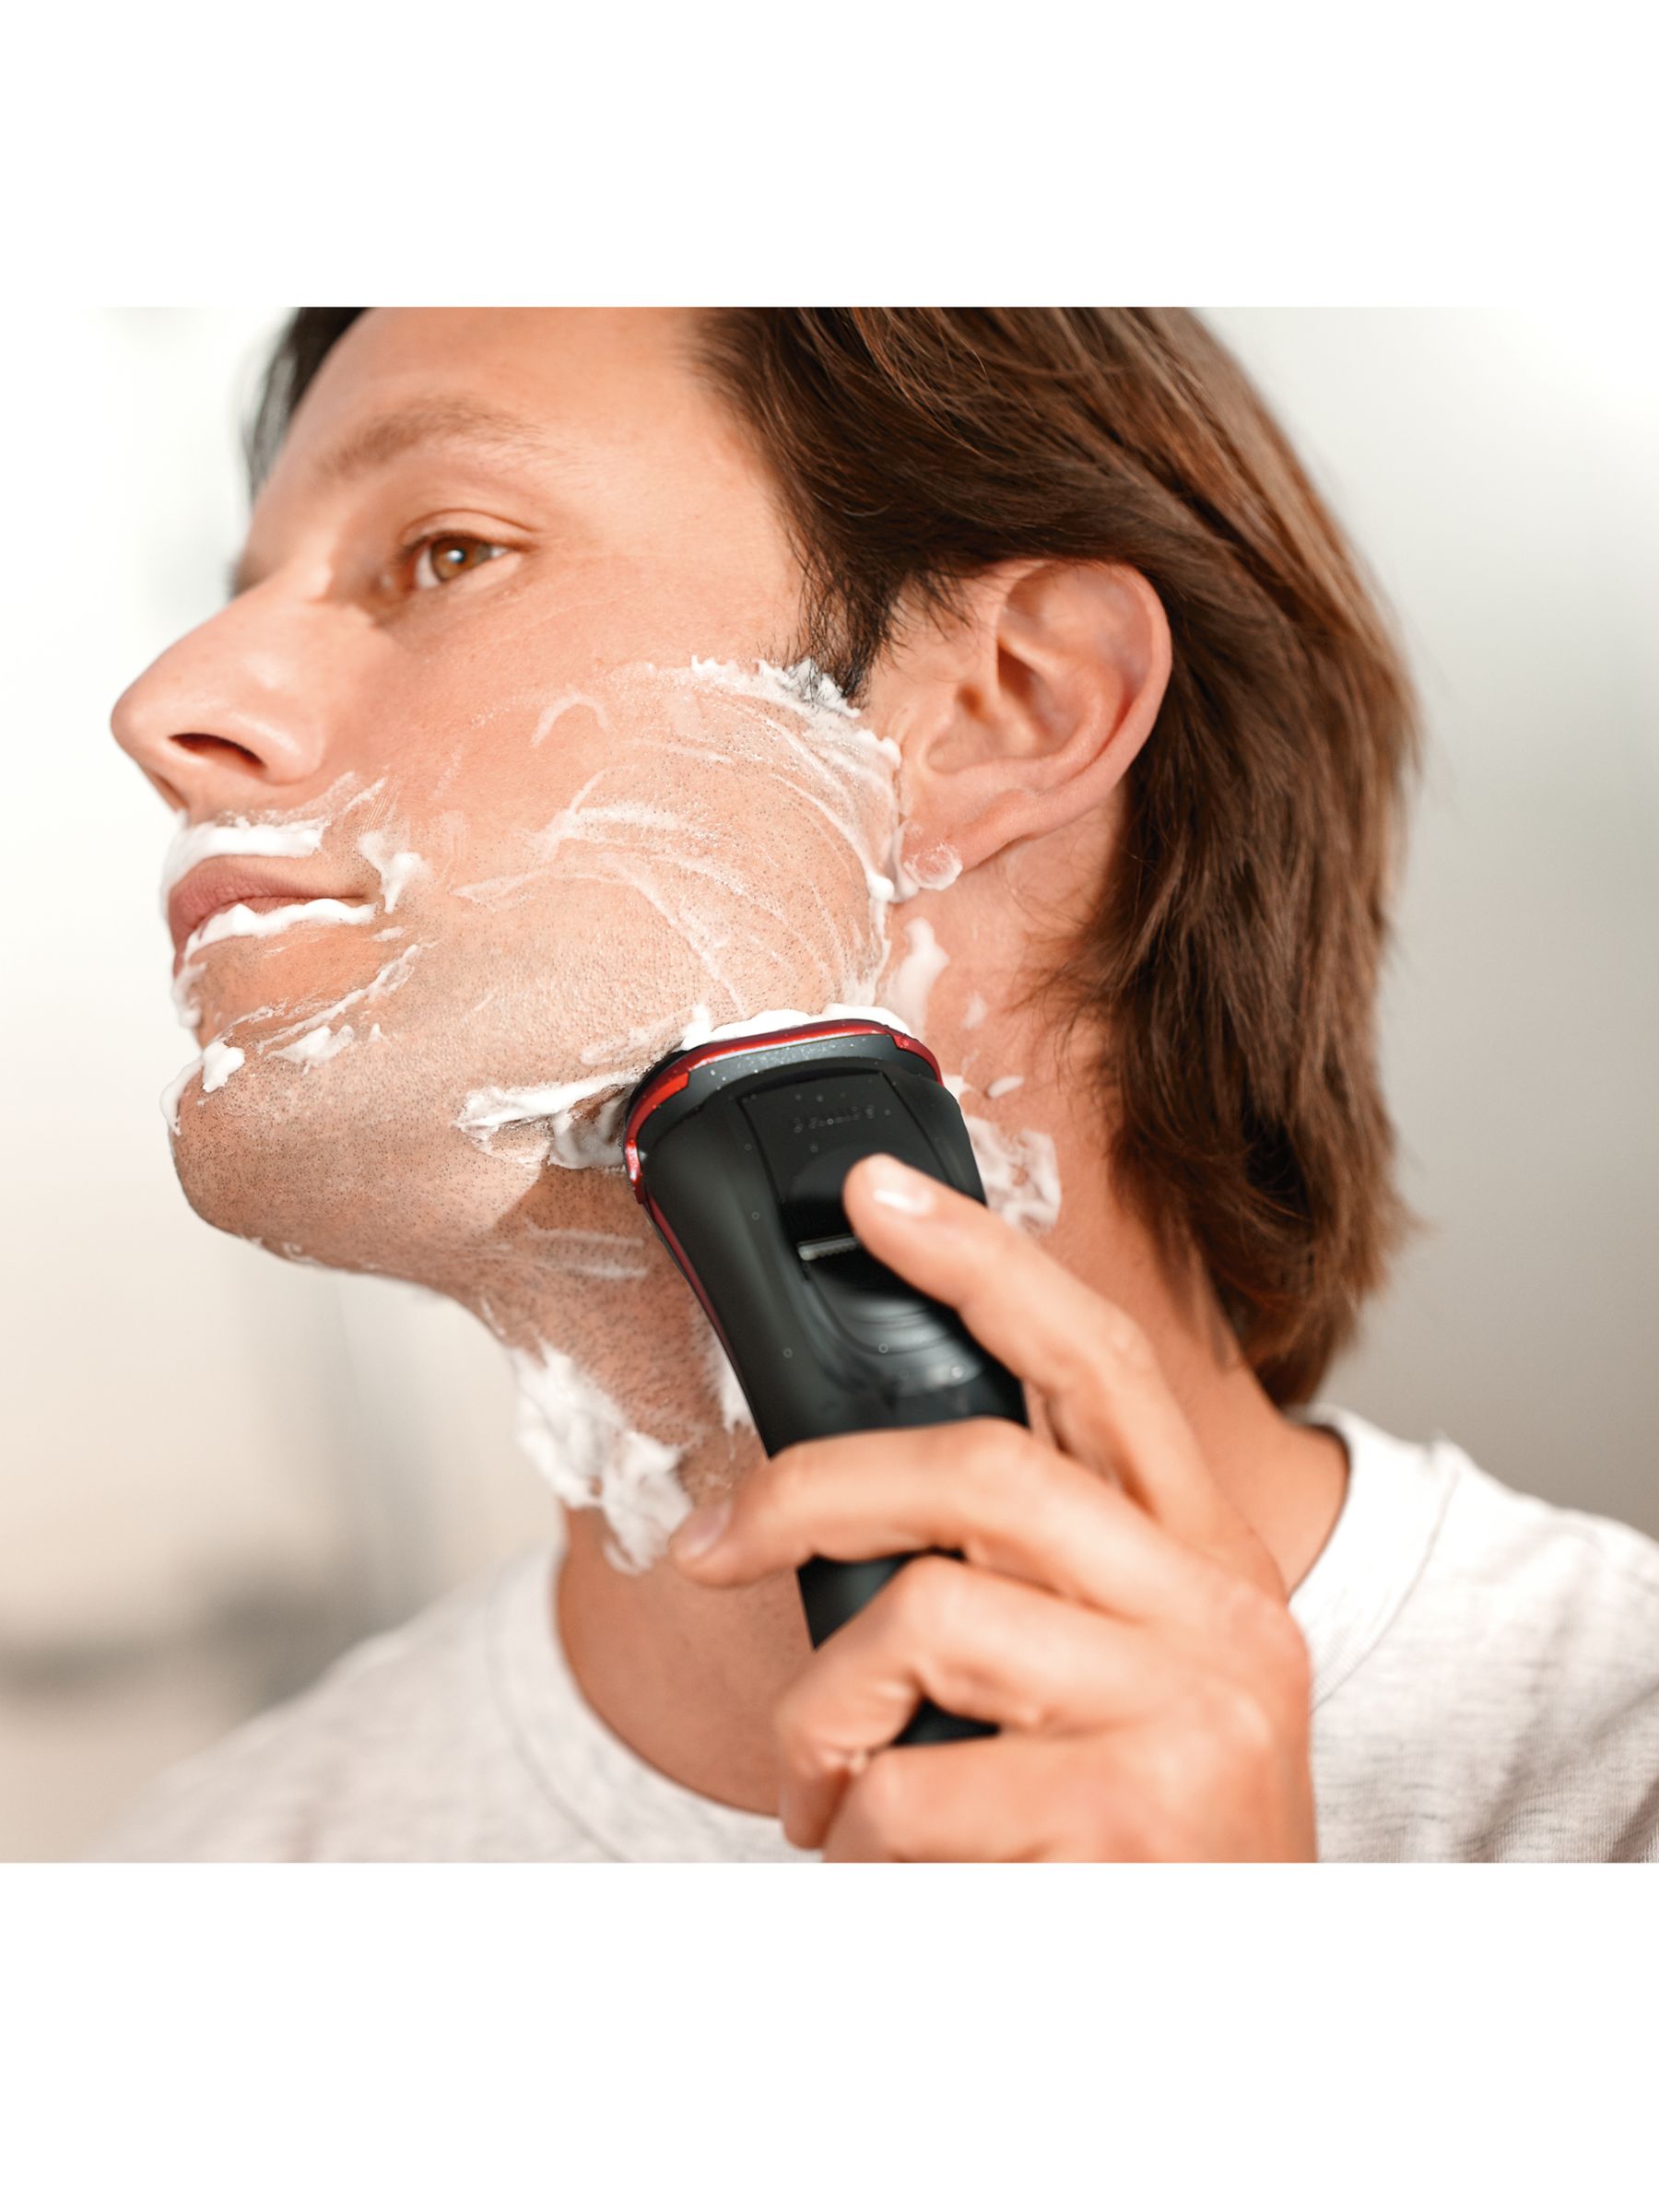 philips 3000 wet and dry shaver